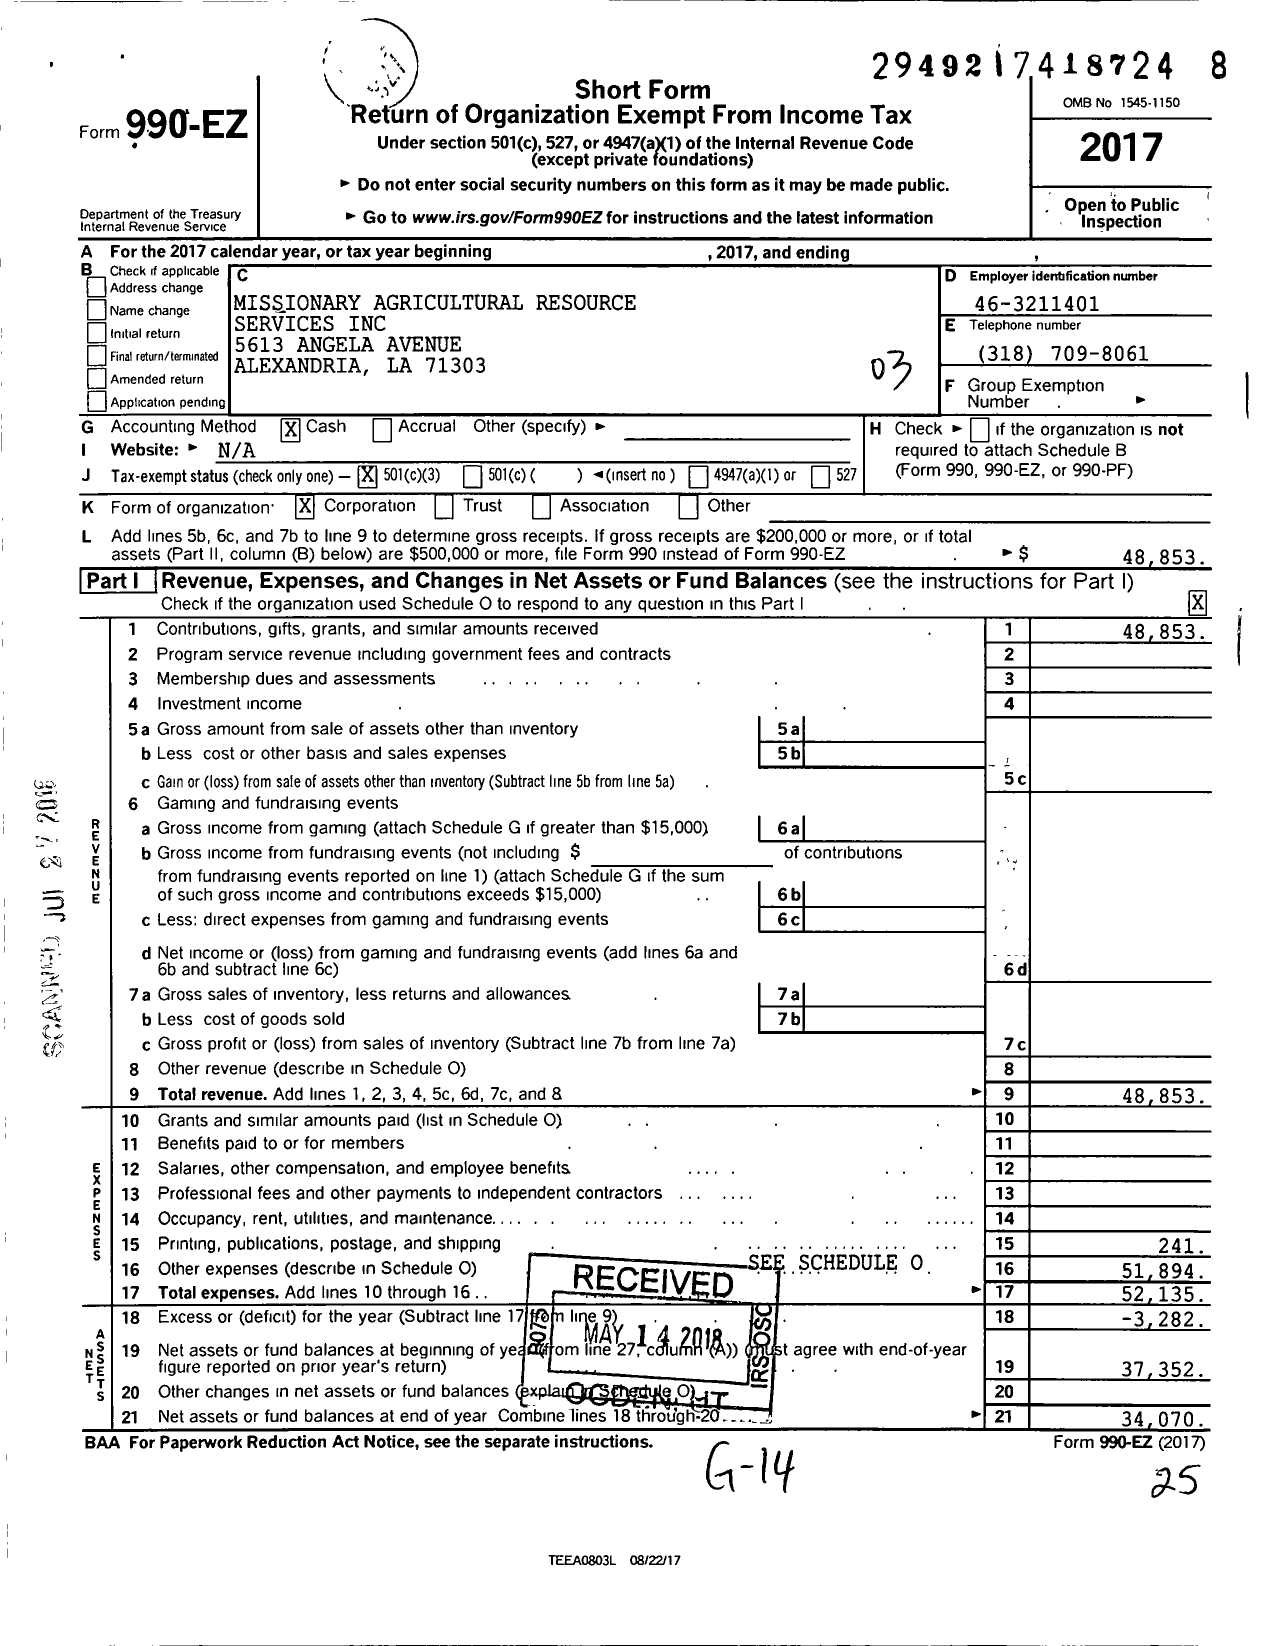 Image of first page of 2017 Form 990EZ for Missionary Agricultural Resource Services